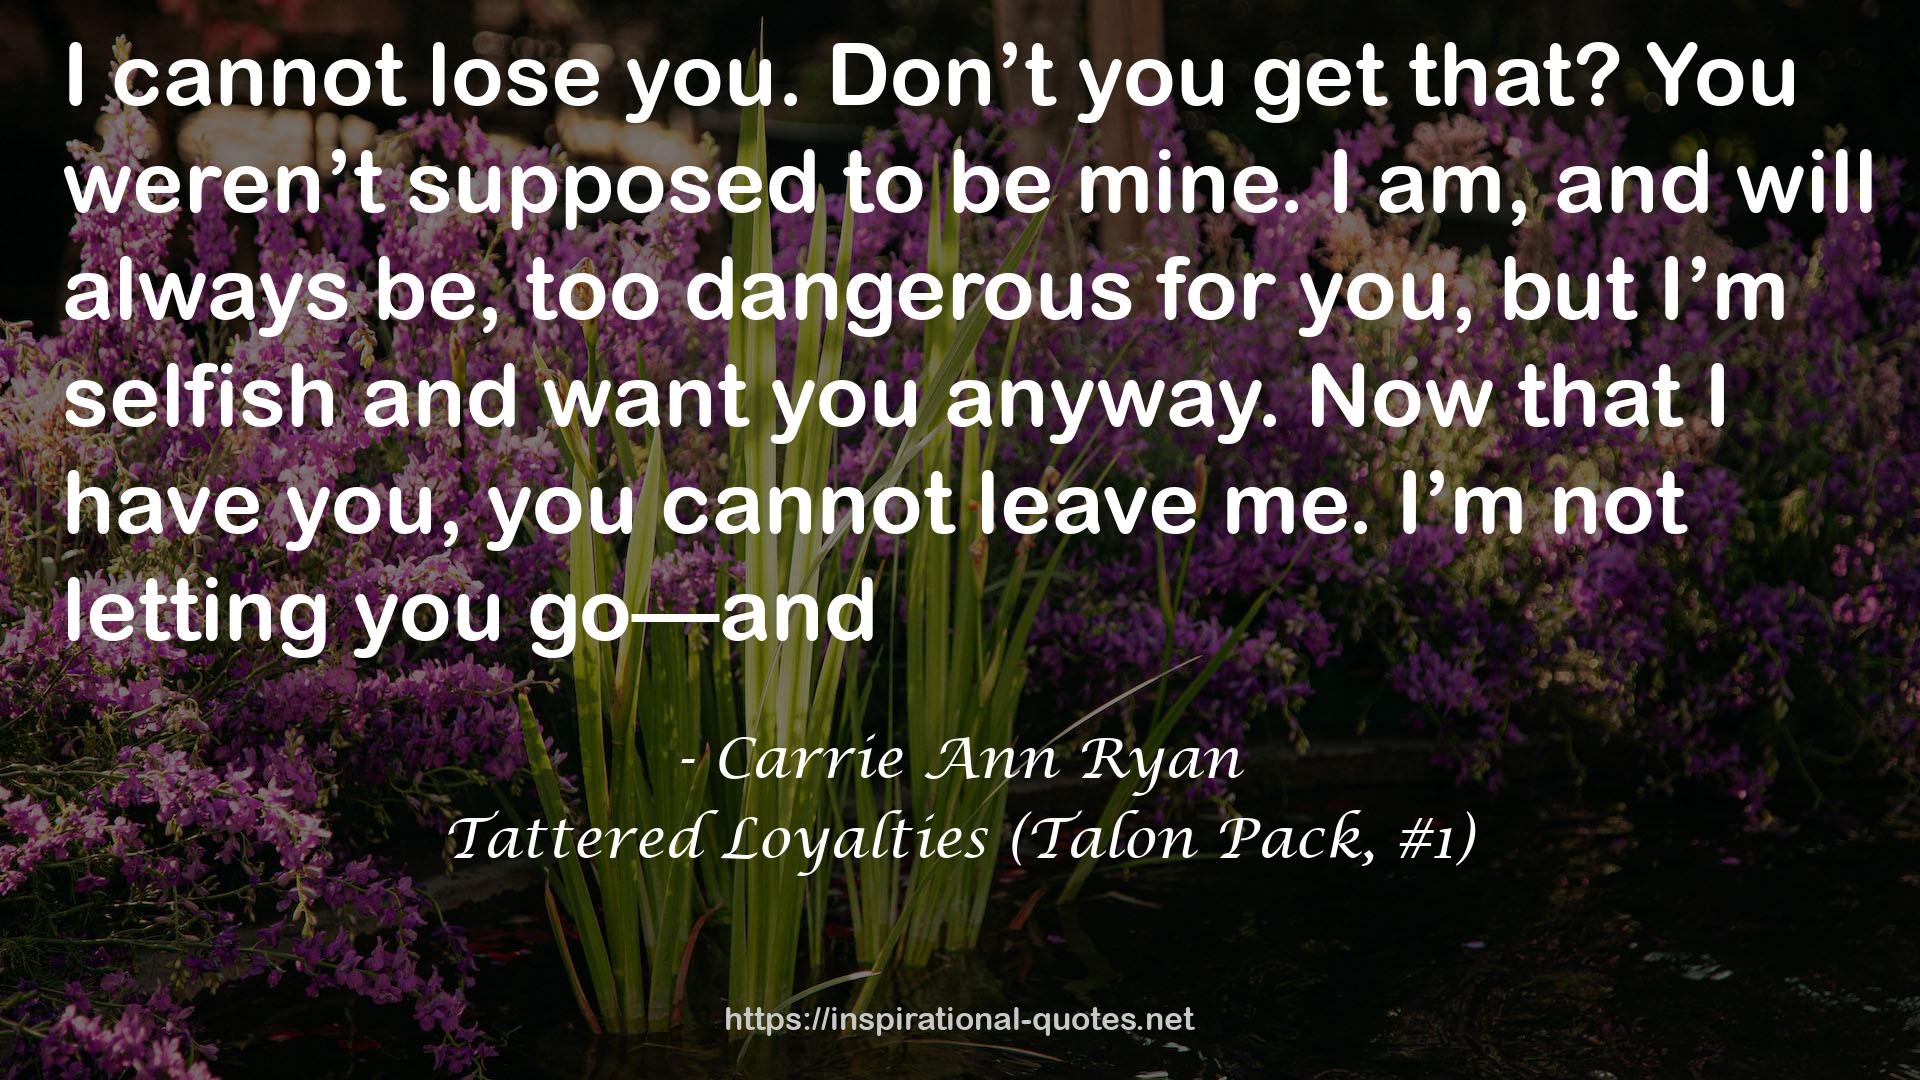 Tattered Loyalties (Talon Pack, #1) QUOTES